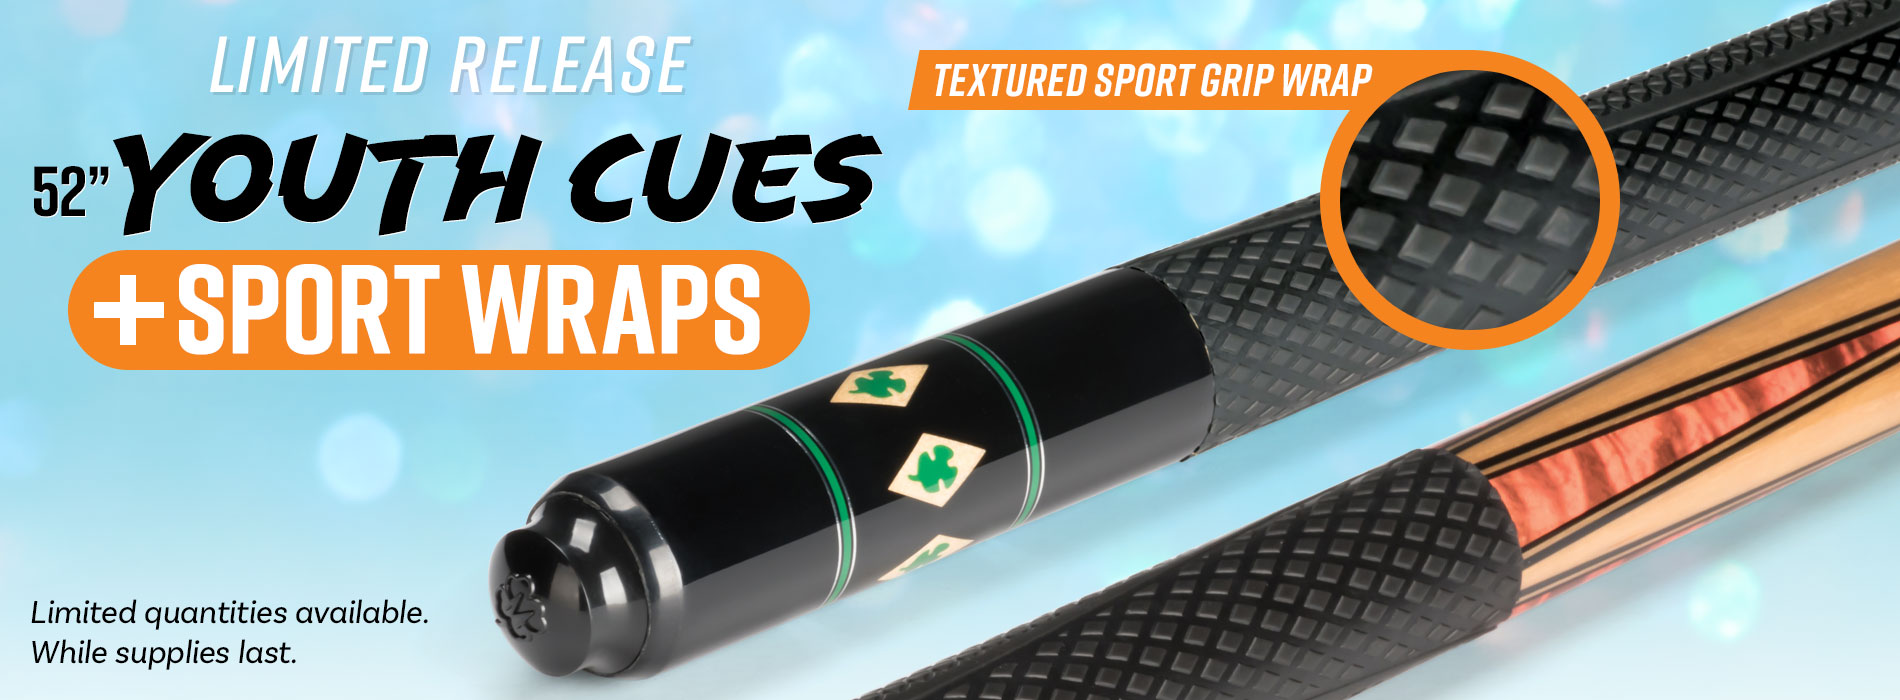 Limited Run: Youth Cues + Sport Wraps